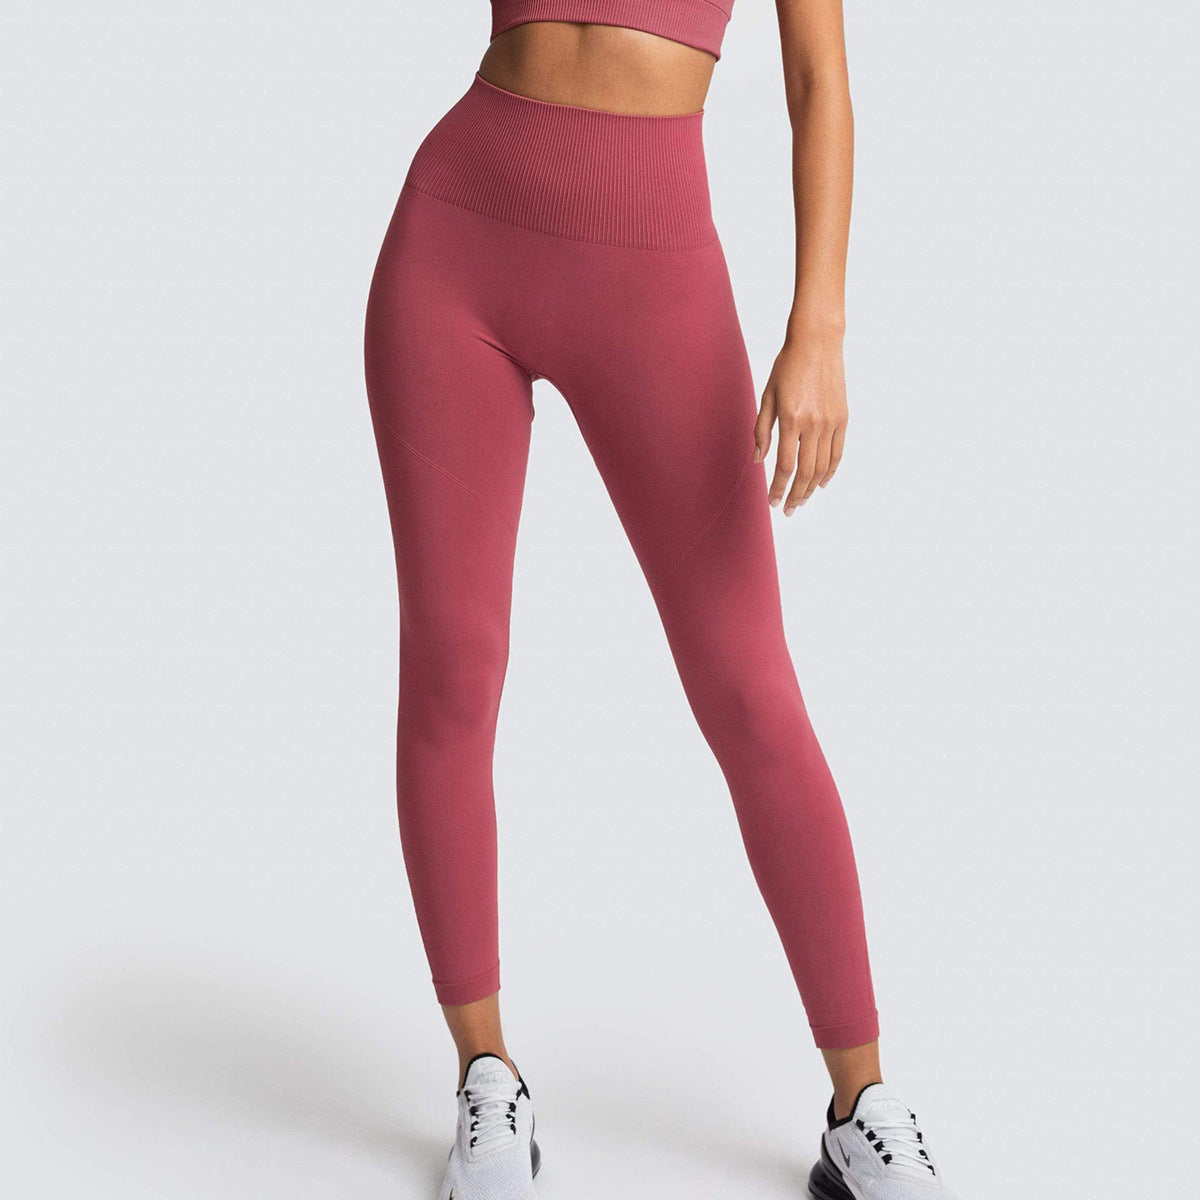 breathable-fitness-pants